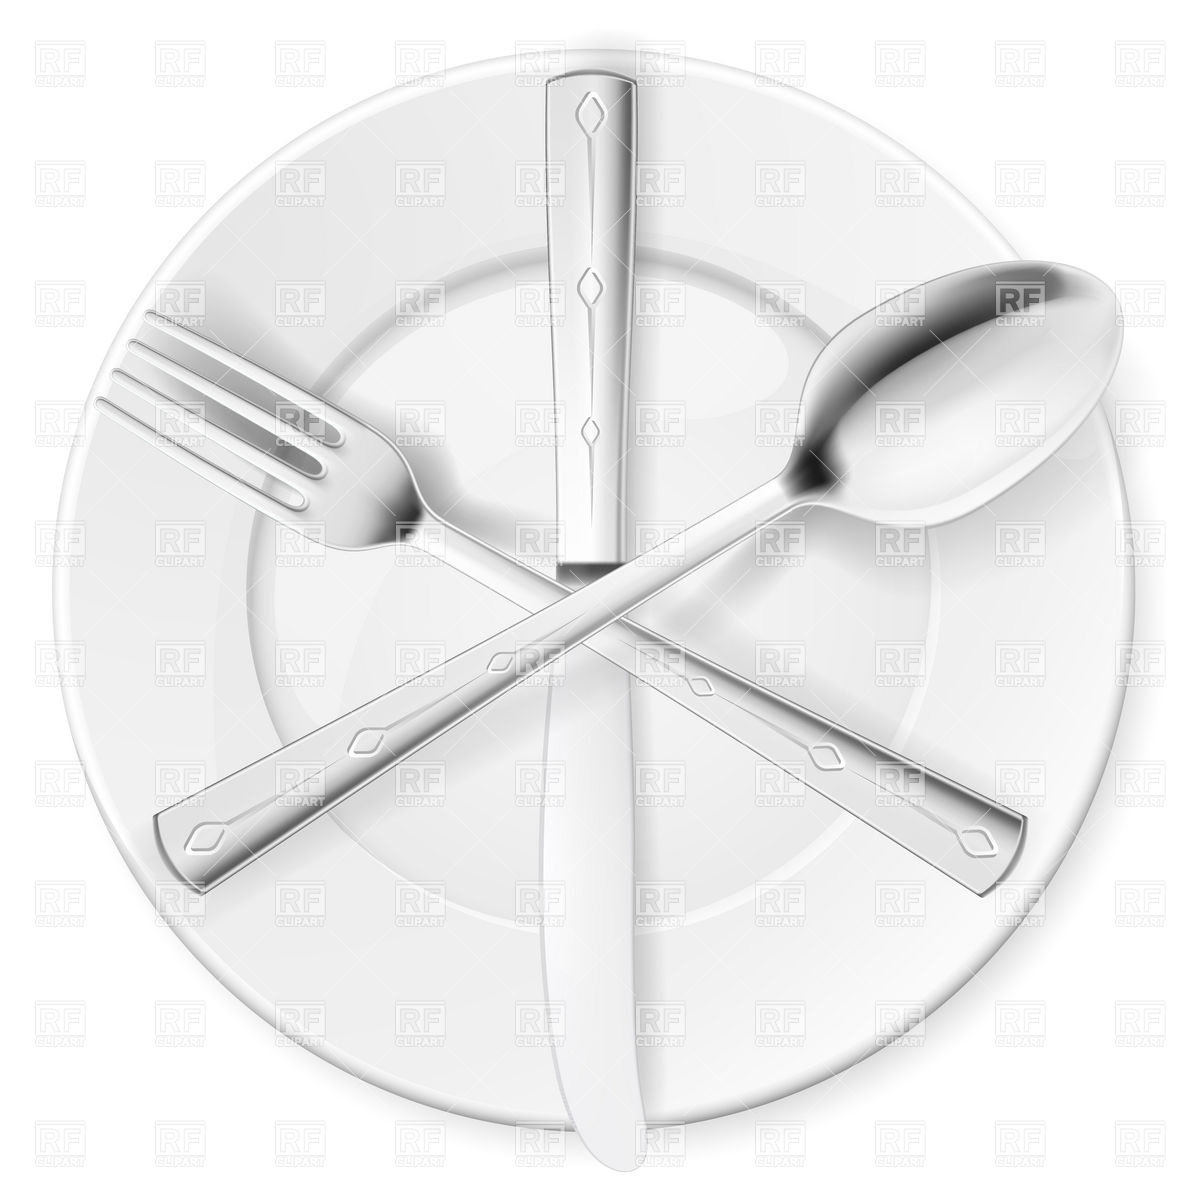 Crossed Fork Spoon And Knife On White Plate 6903 Objects Download